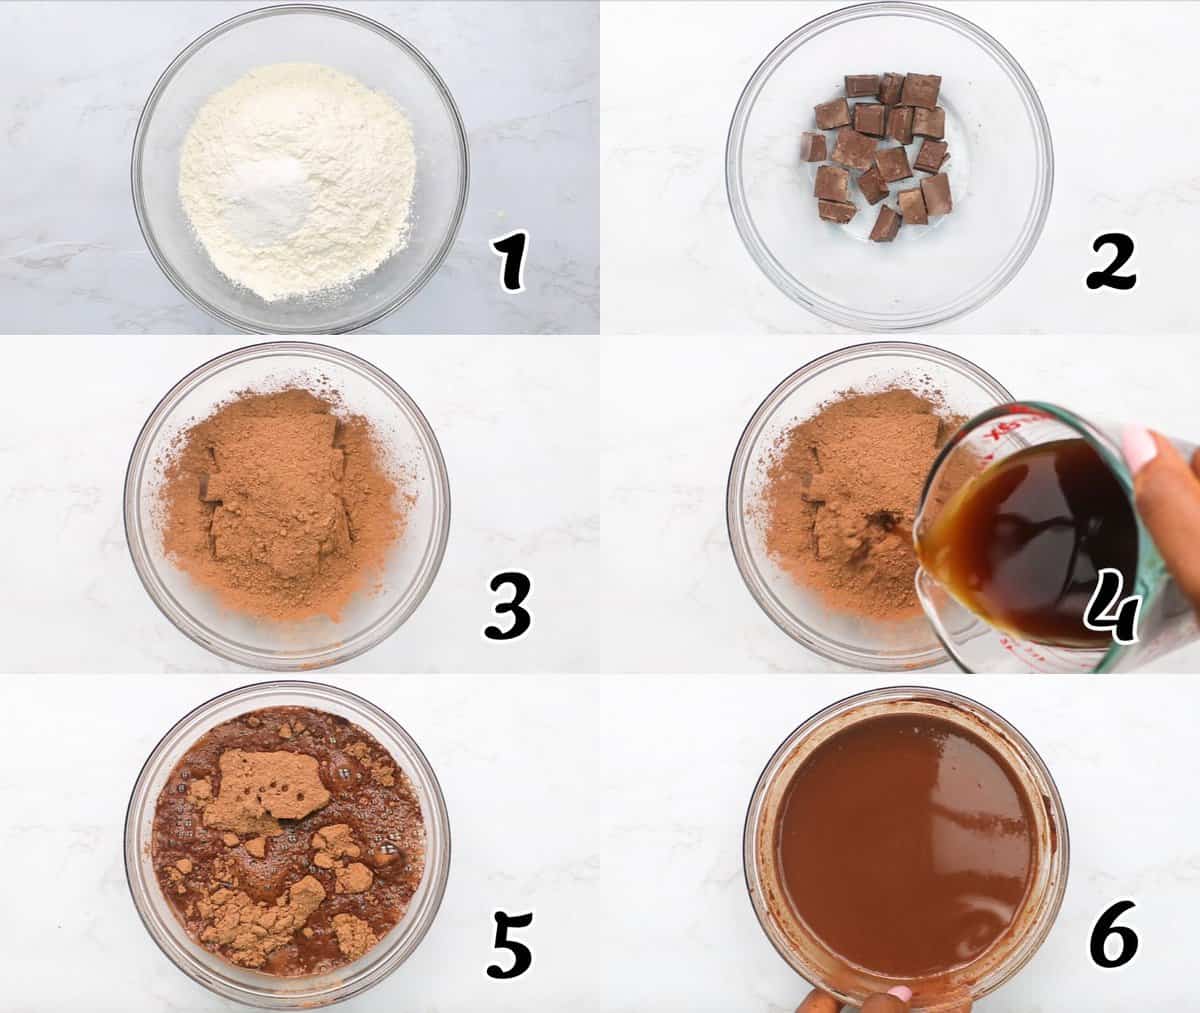 Mix dry ingredients, mix cocoa, and add hot coffee